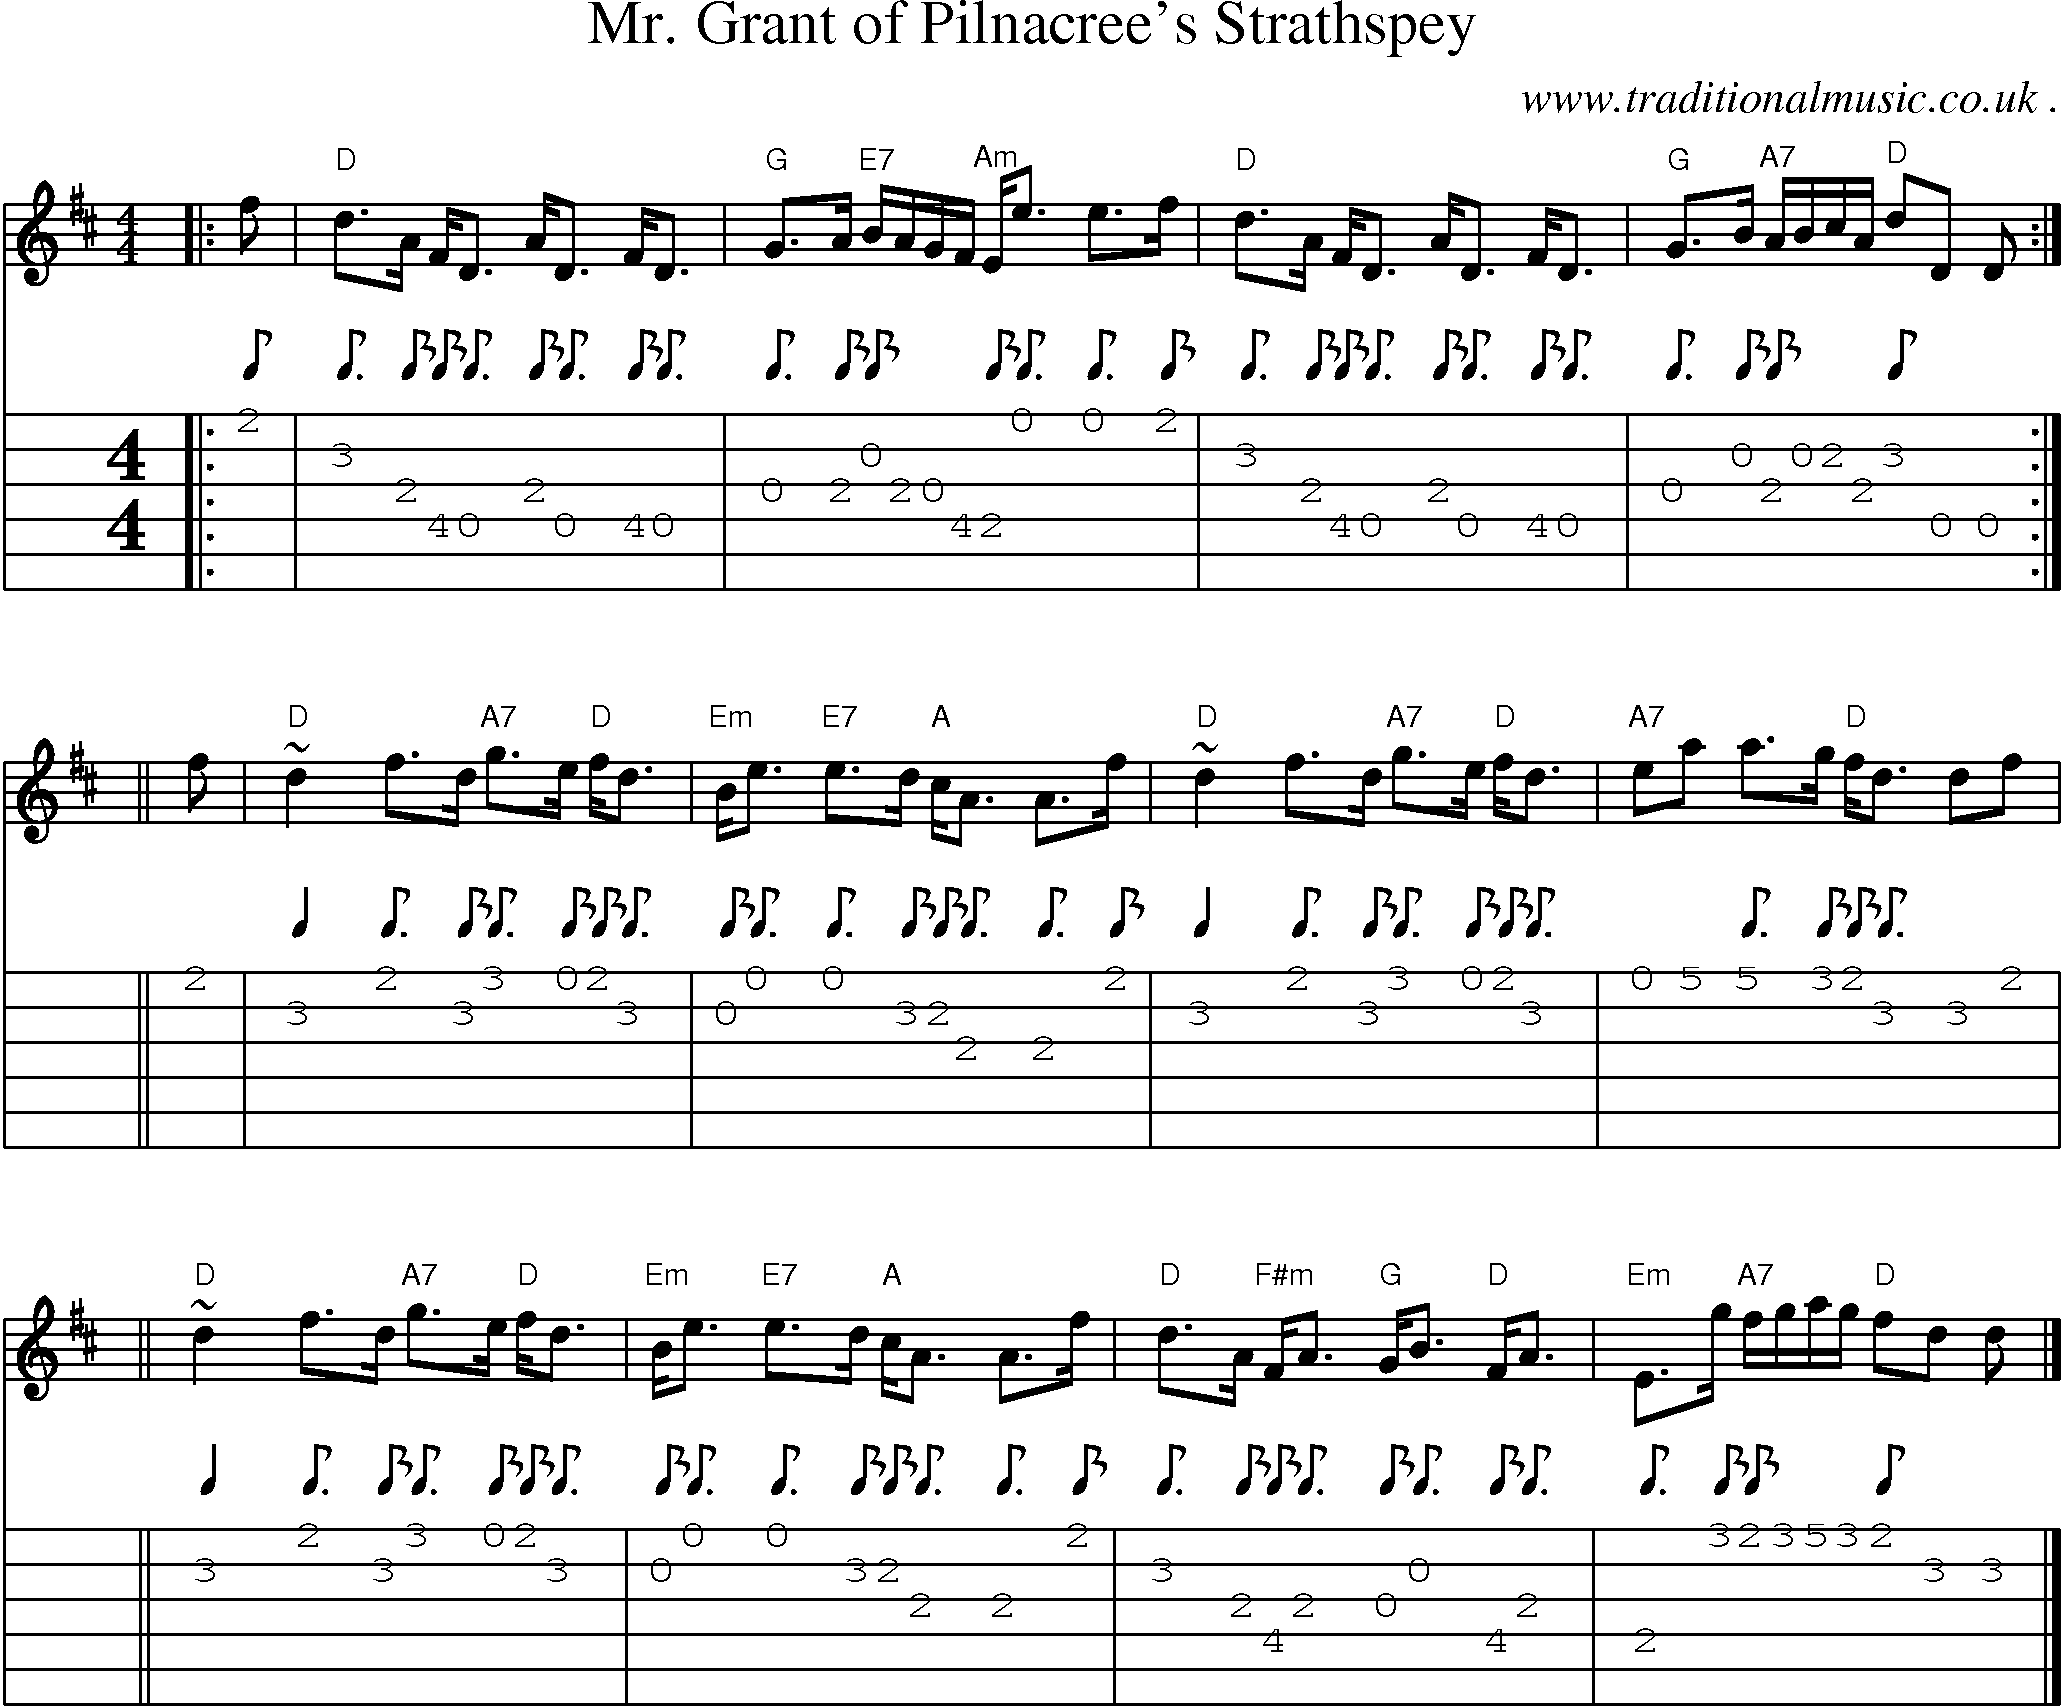 Sheet-music  score, Chords and Guitar Tabs for Mr Grant Of Pilnacrees Strathspey